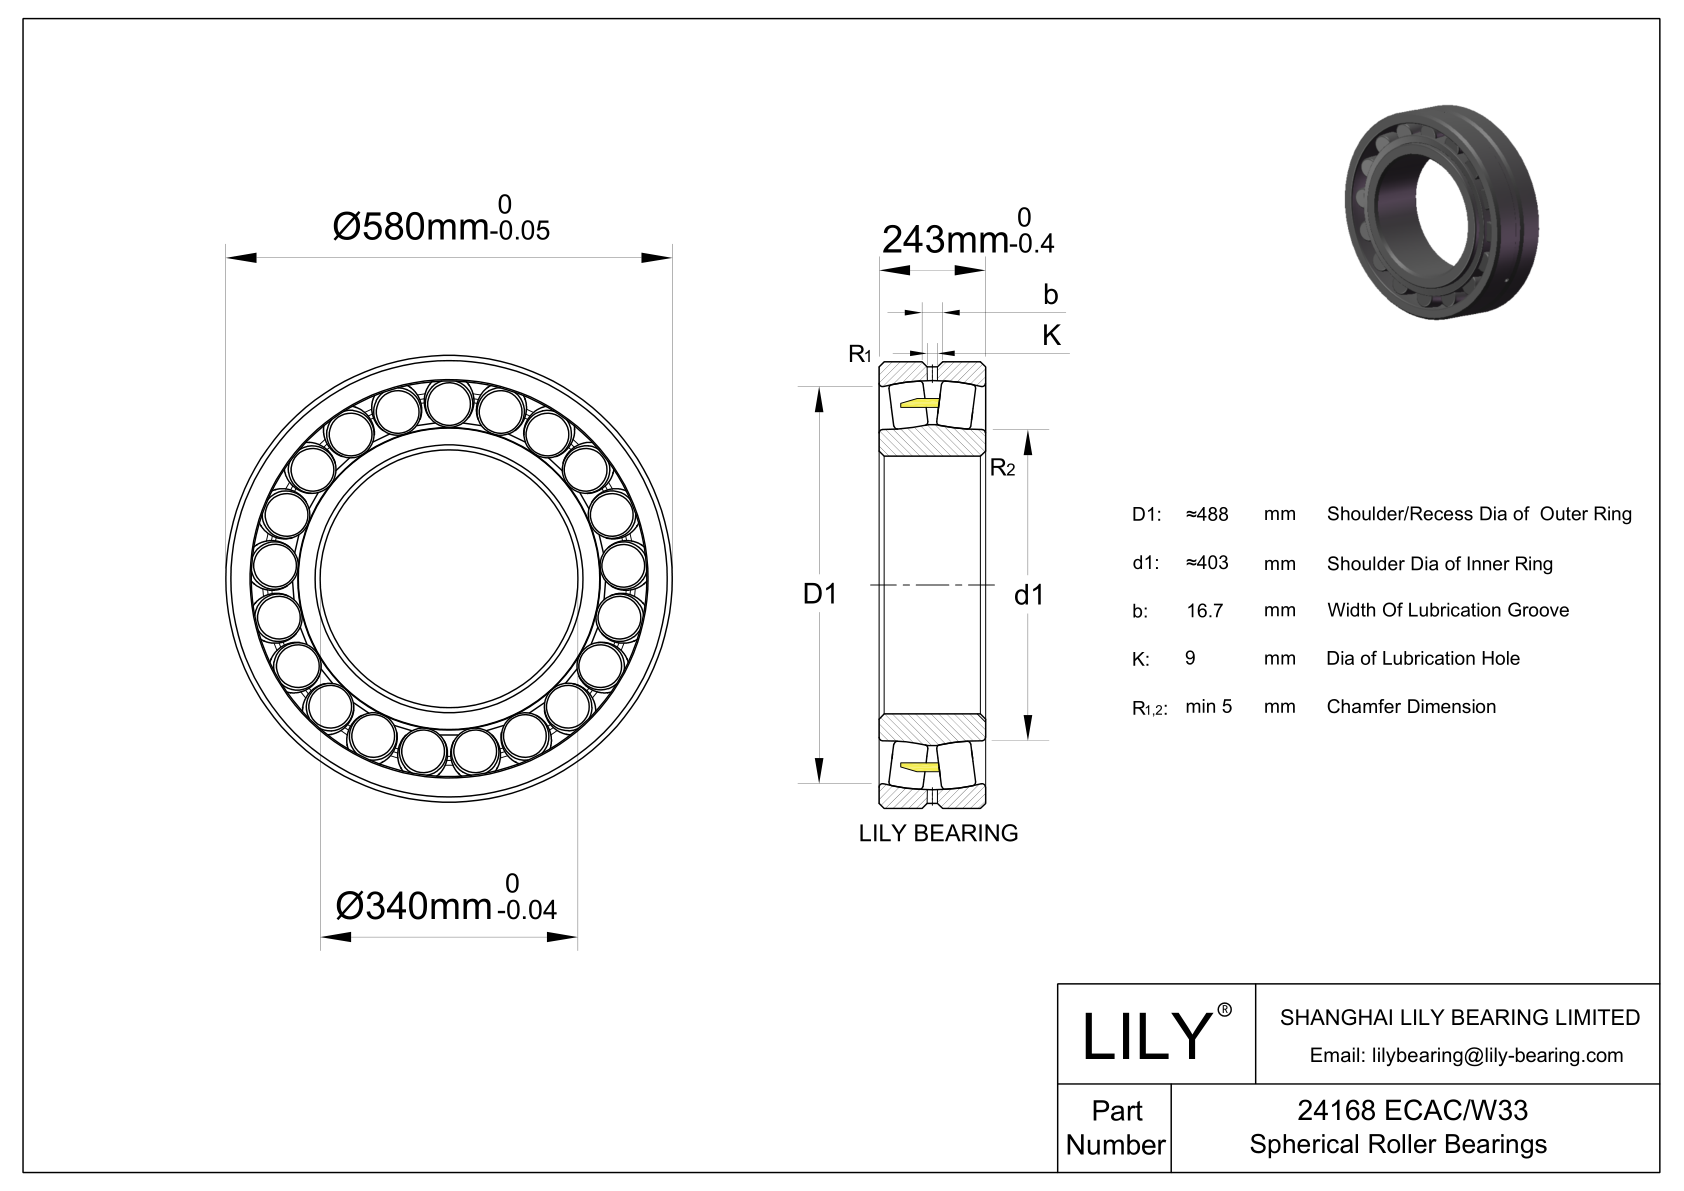 24168 ECAC/W33 Double Row Spherical Roller Bearing cad drawing